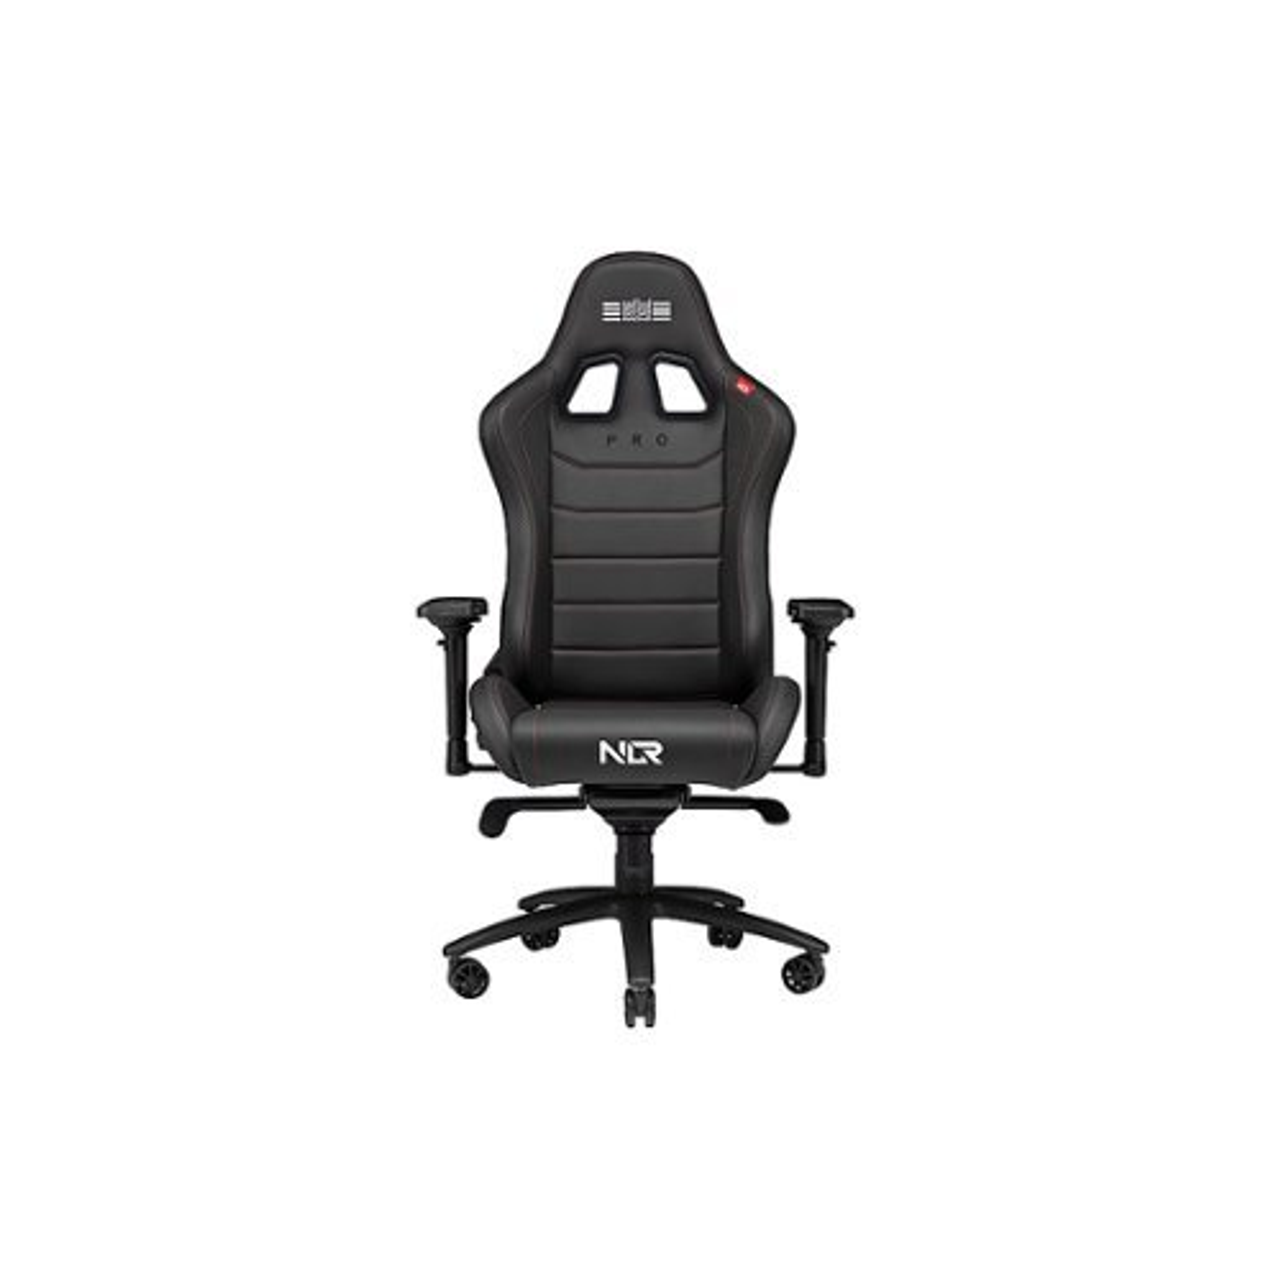 Next Level Racing - Pro Gaming Chair Leather Edition - Black